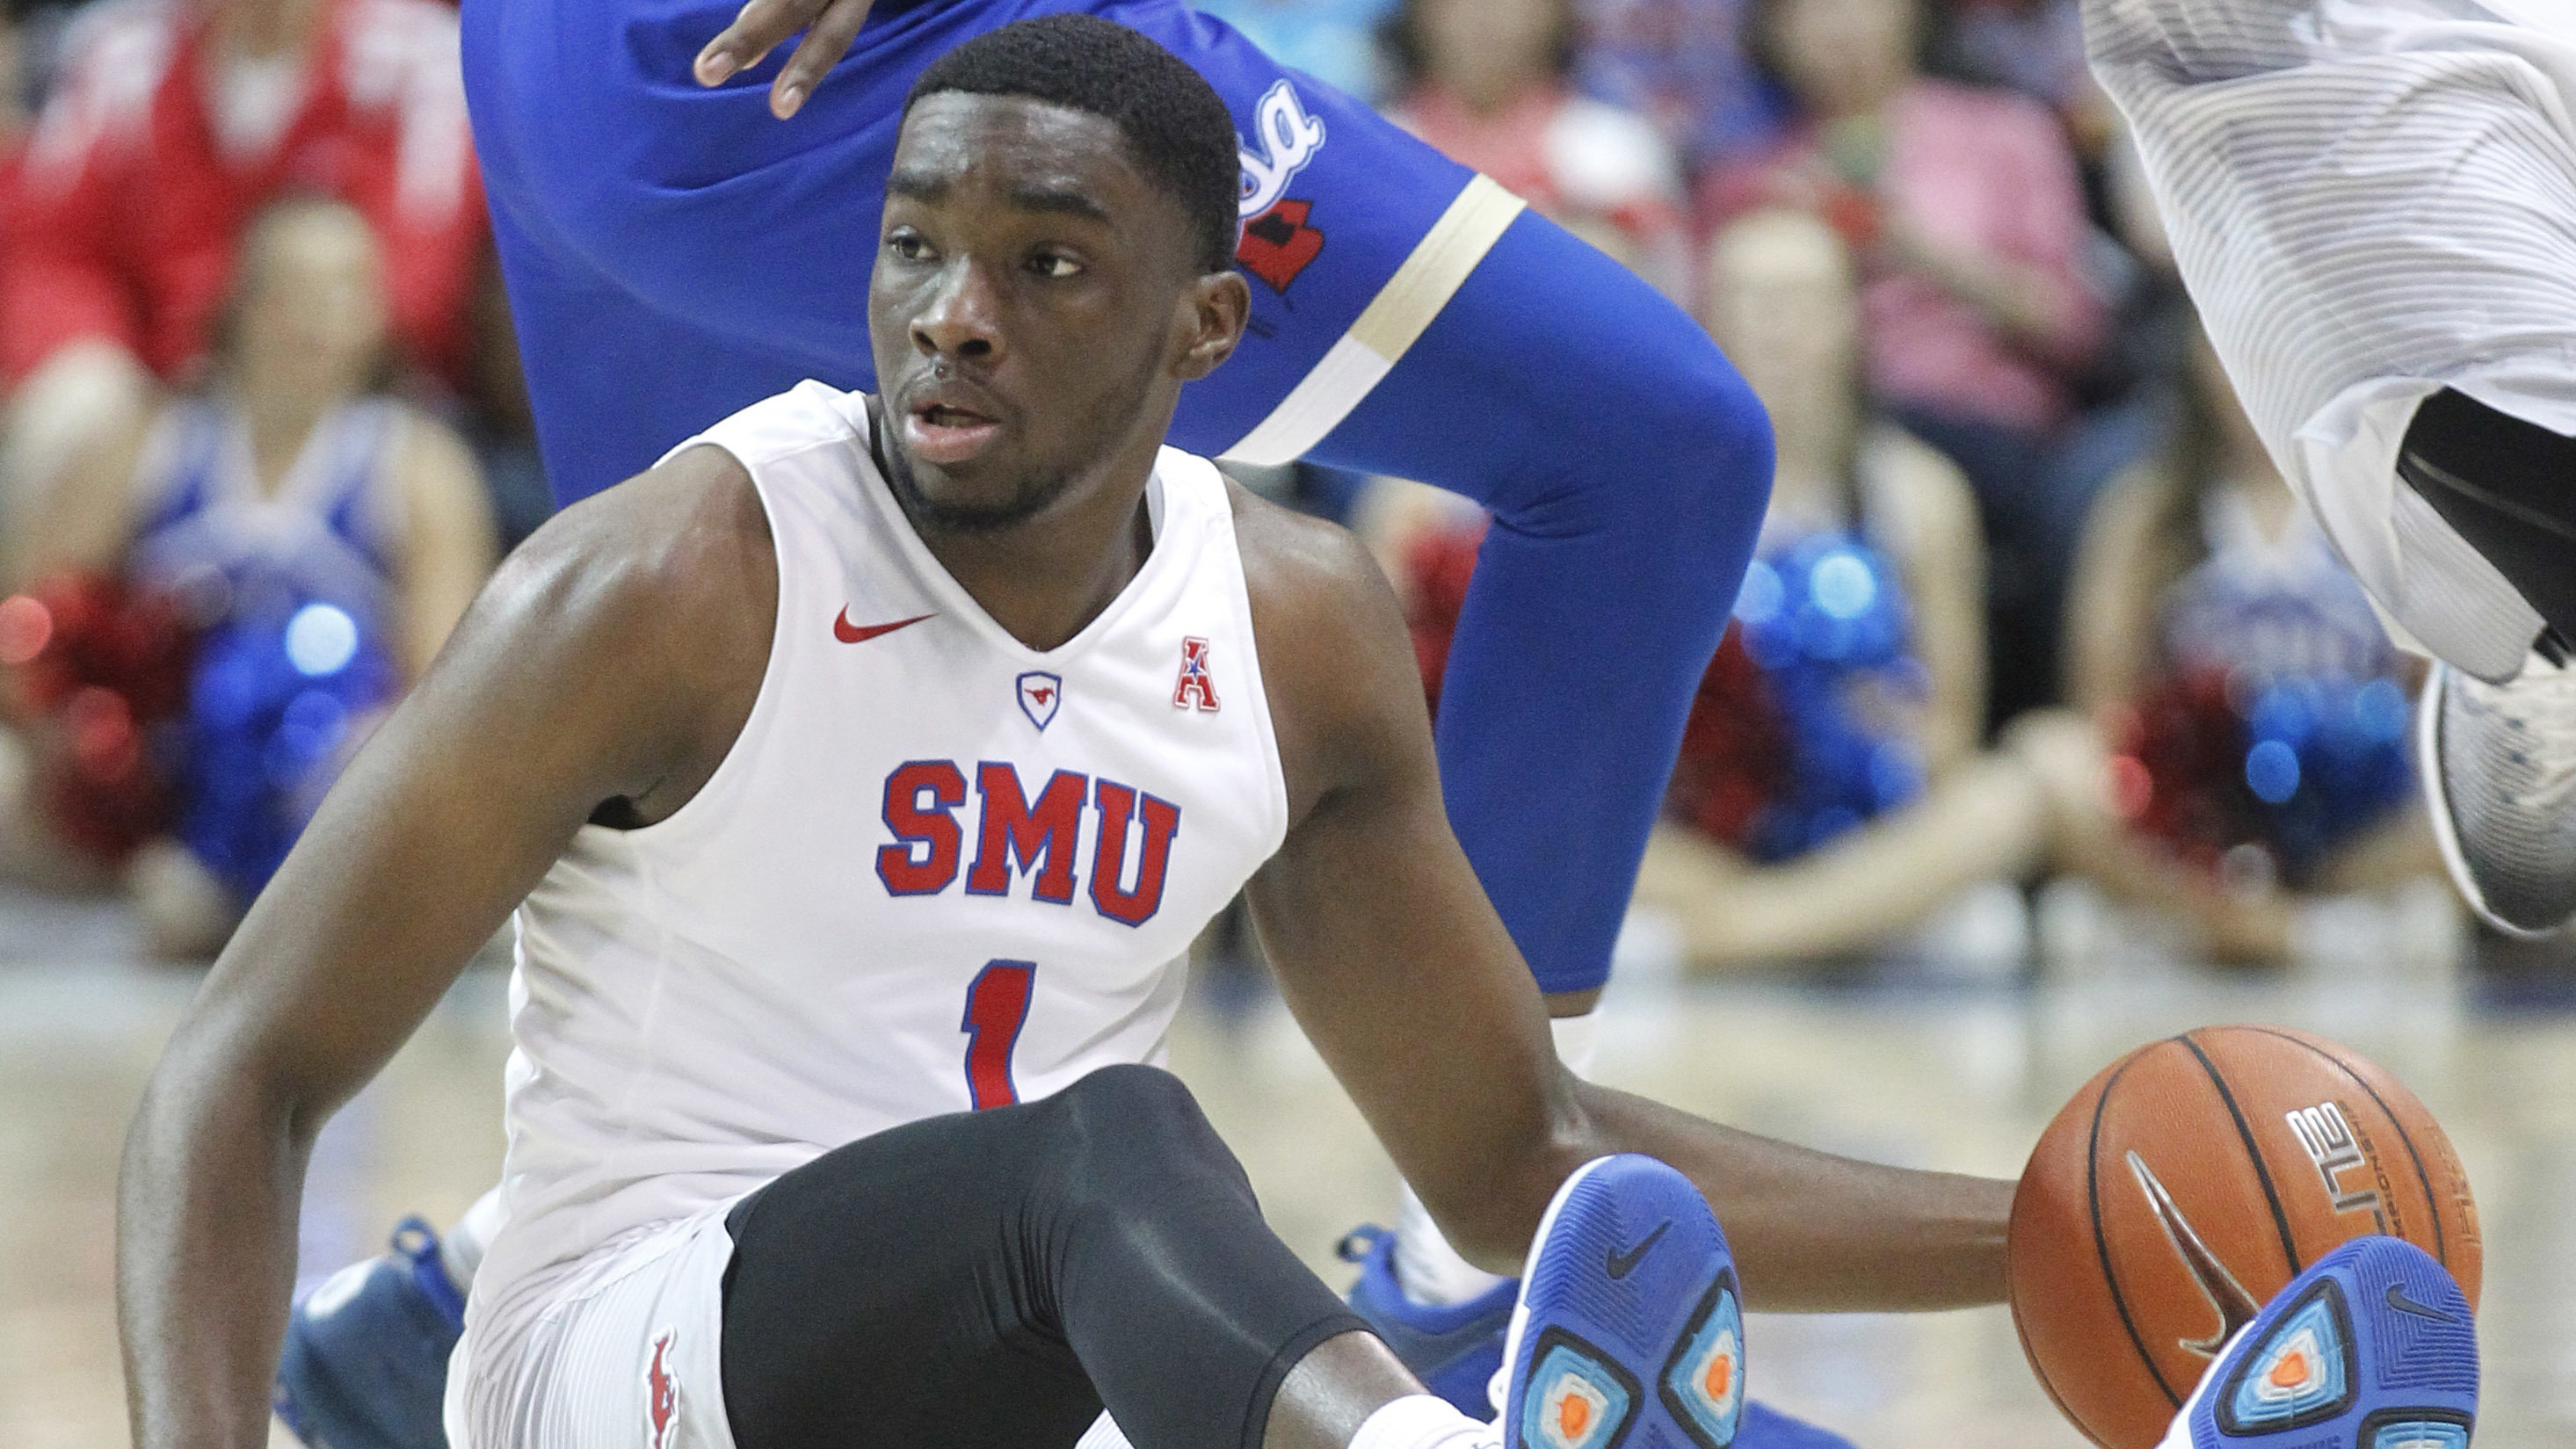 SMU basketball: Shake Milton's crazy alley-oop (video) - Sports Illustrated